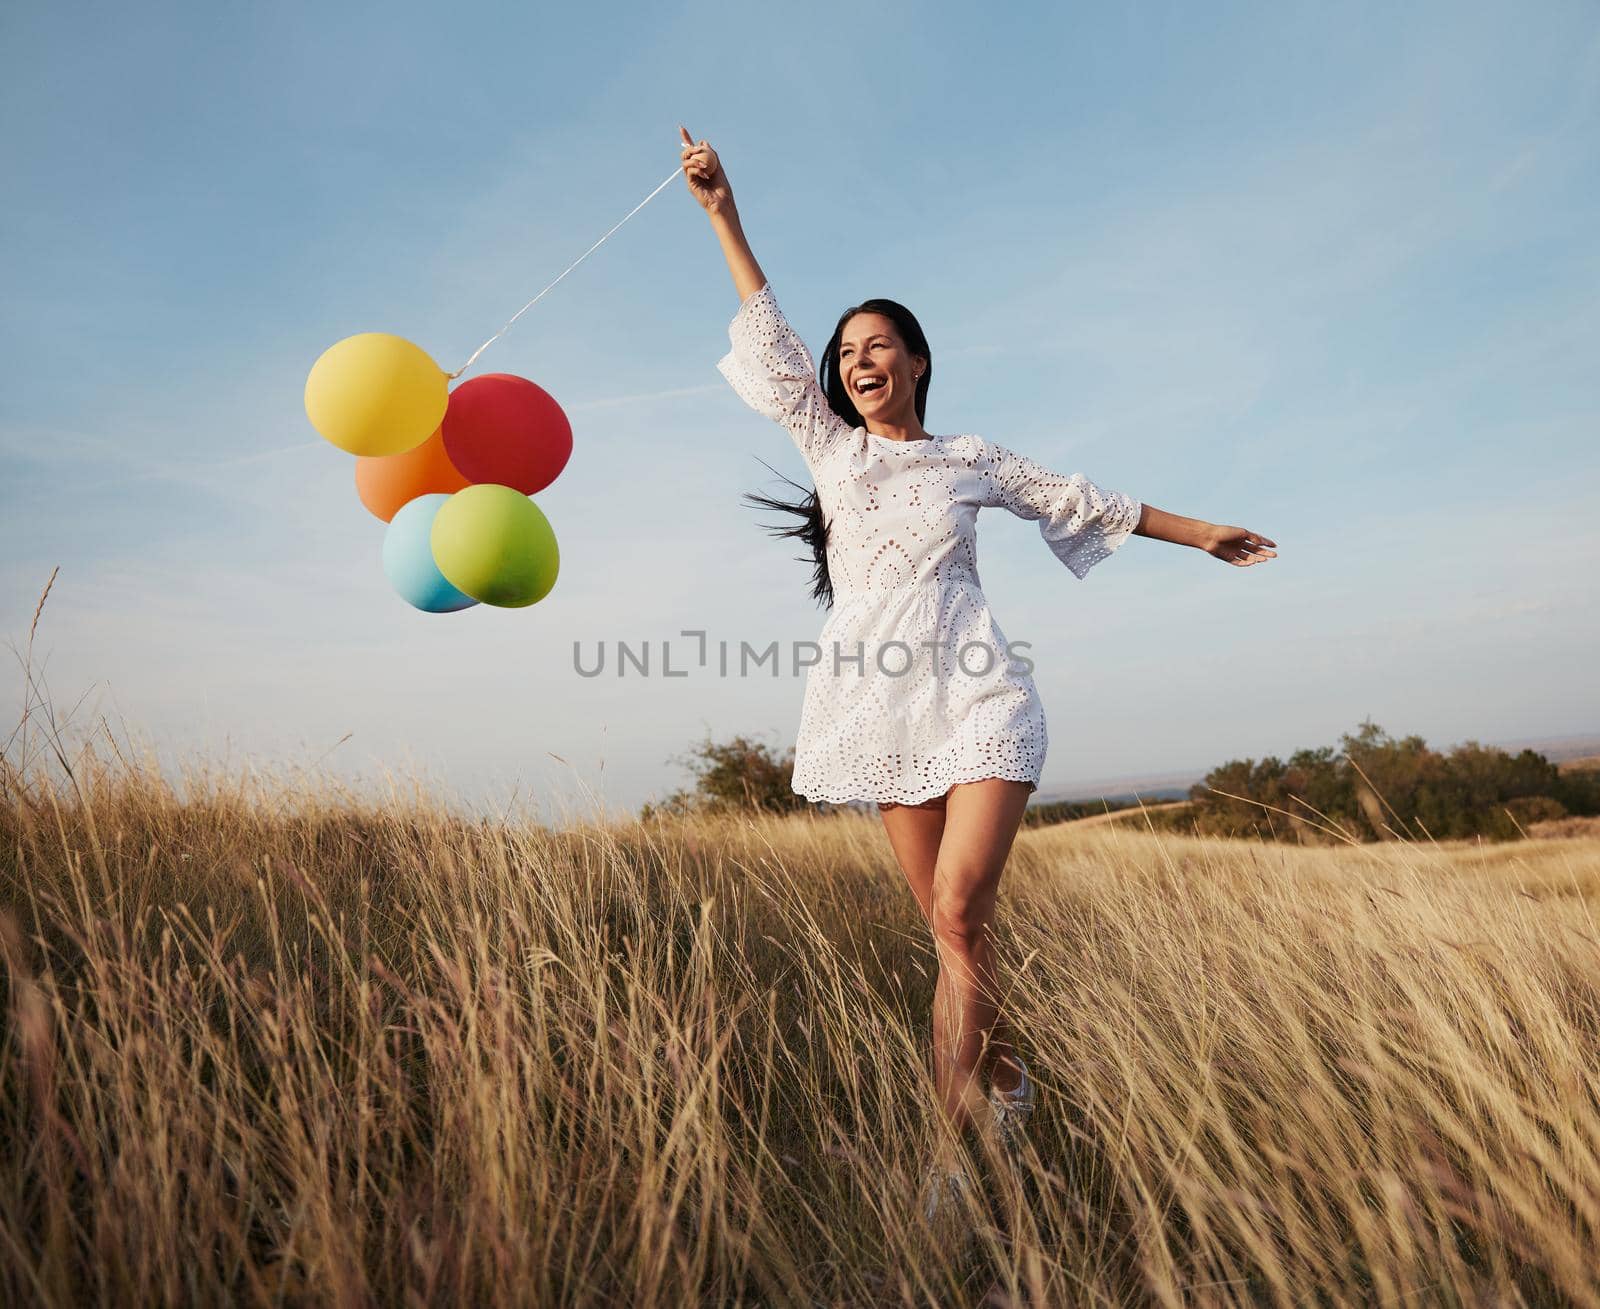 woman balloon girl outdoor fun happy lifestyle running happiness nature summer vitality healthy carefree by Picsfive